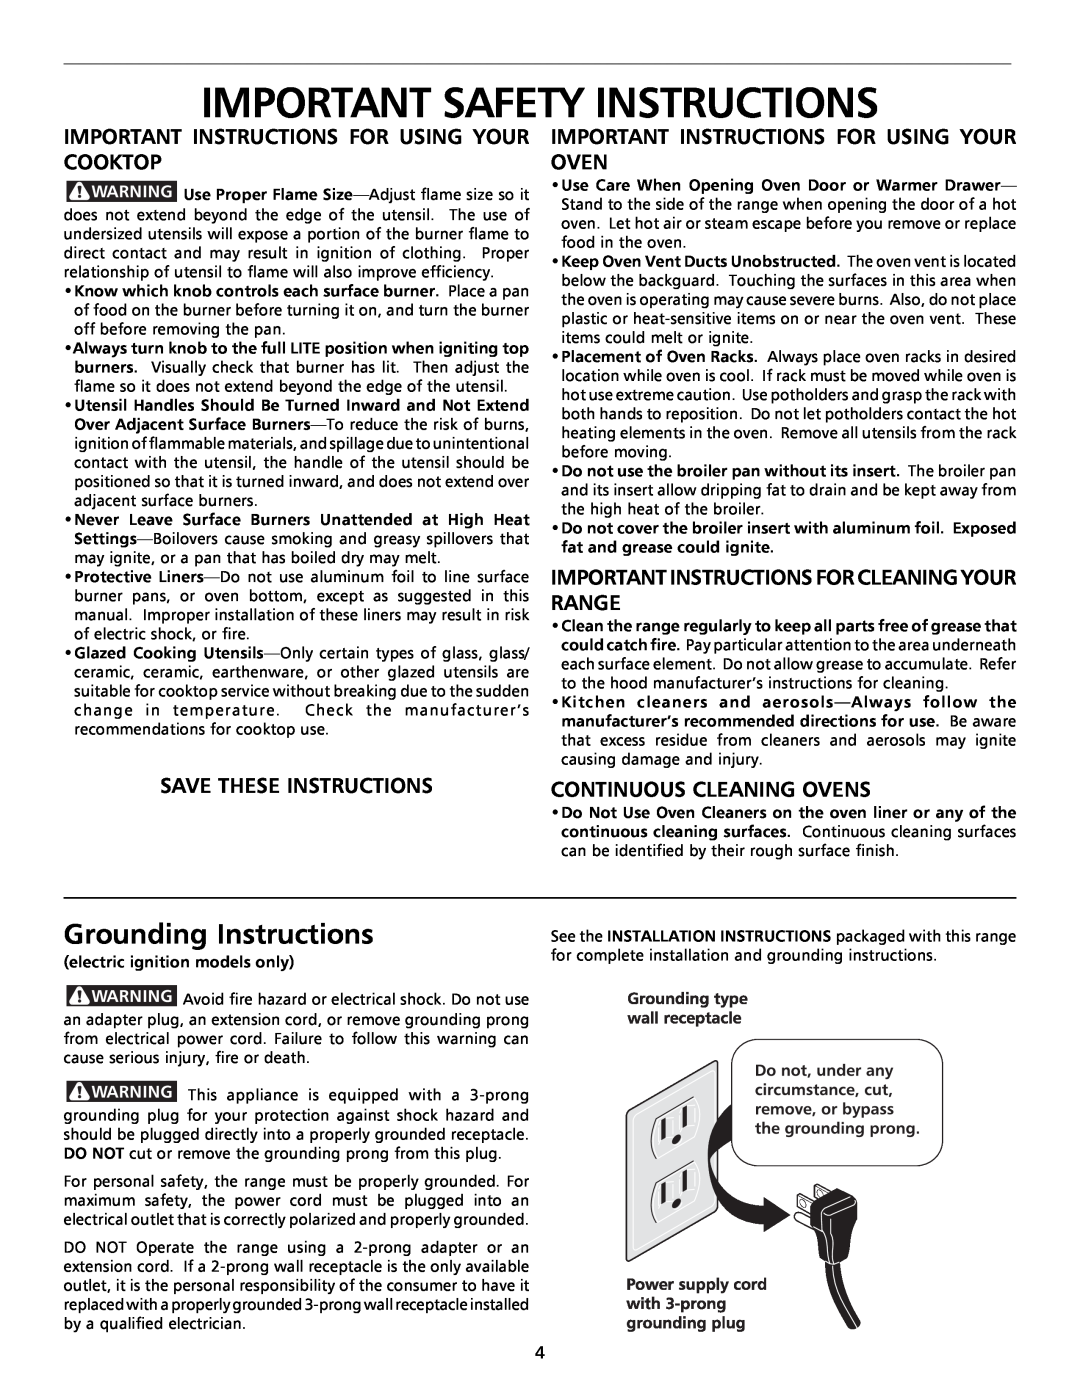 Tappan 316000189 Grounding Instructions, Important Instructions For Using Your Cooktop, Save These Instructions 